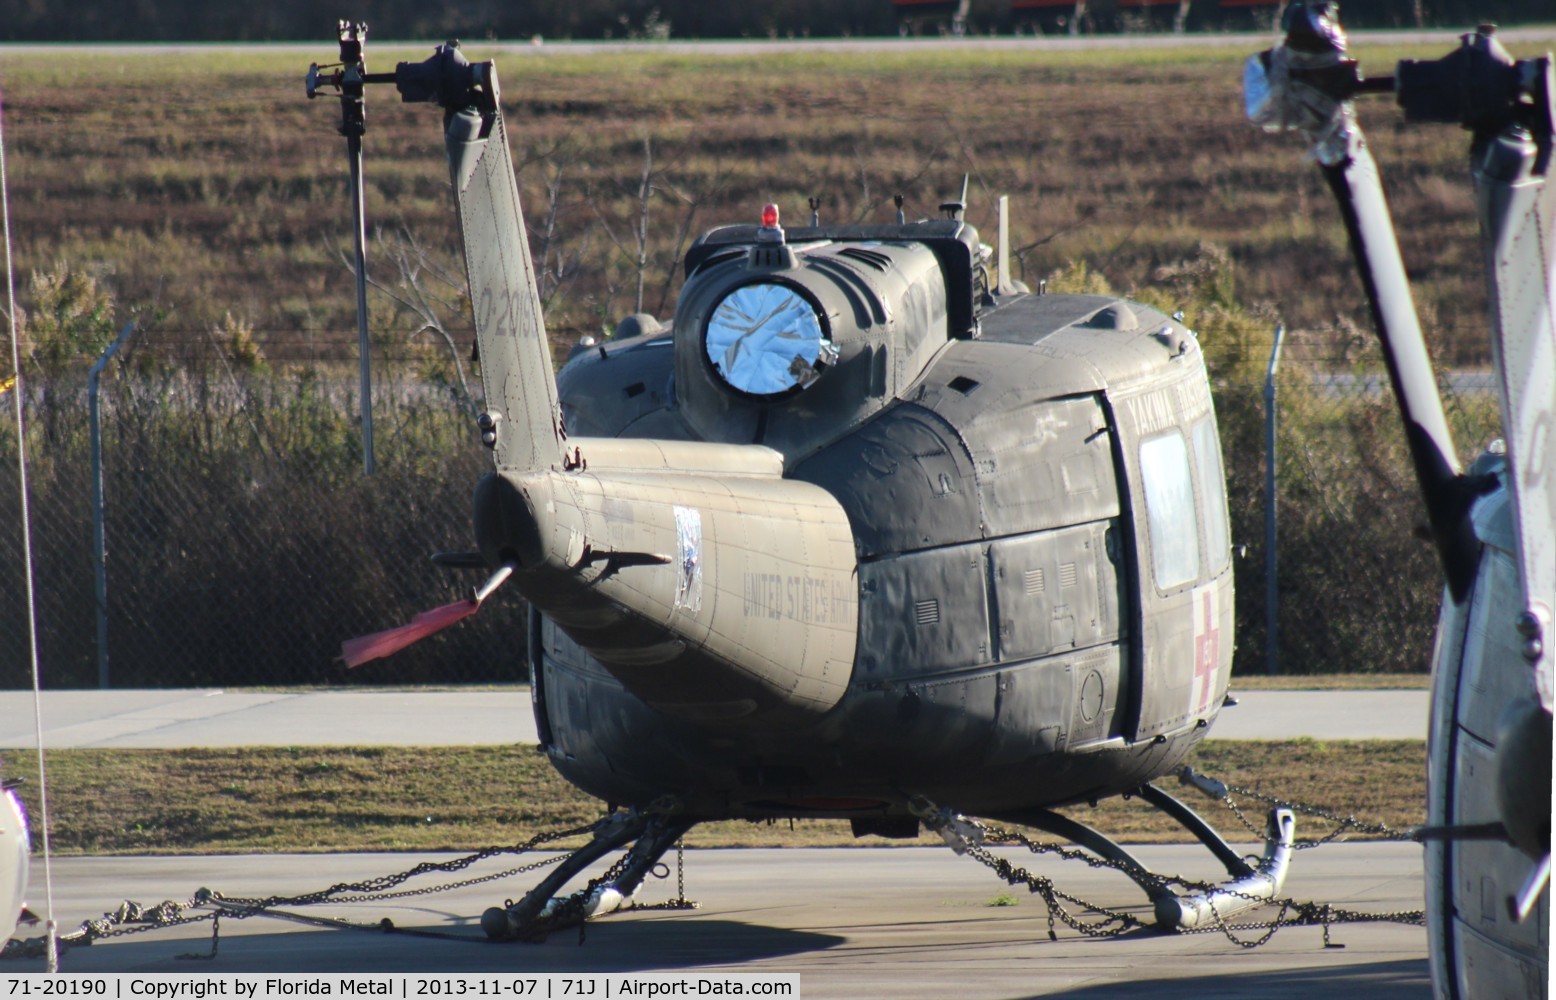 71-20190, 1971 Bell UH-1H Iroquois C/N 13014, UH-1H